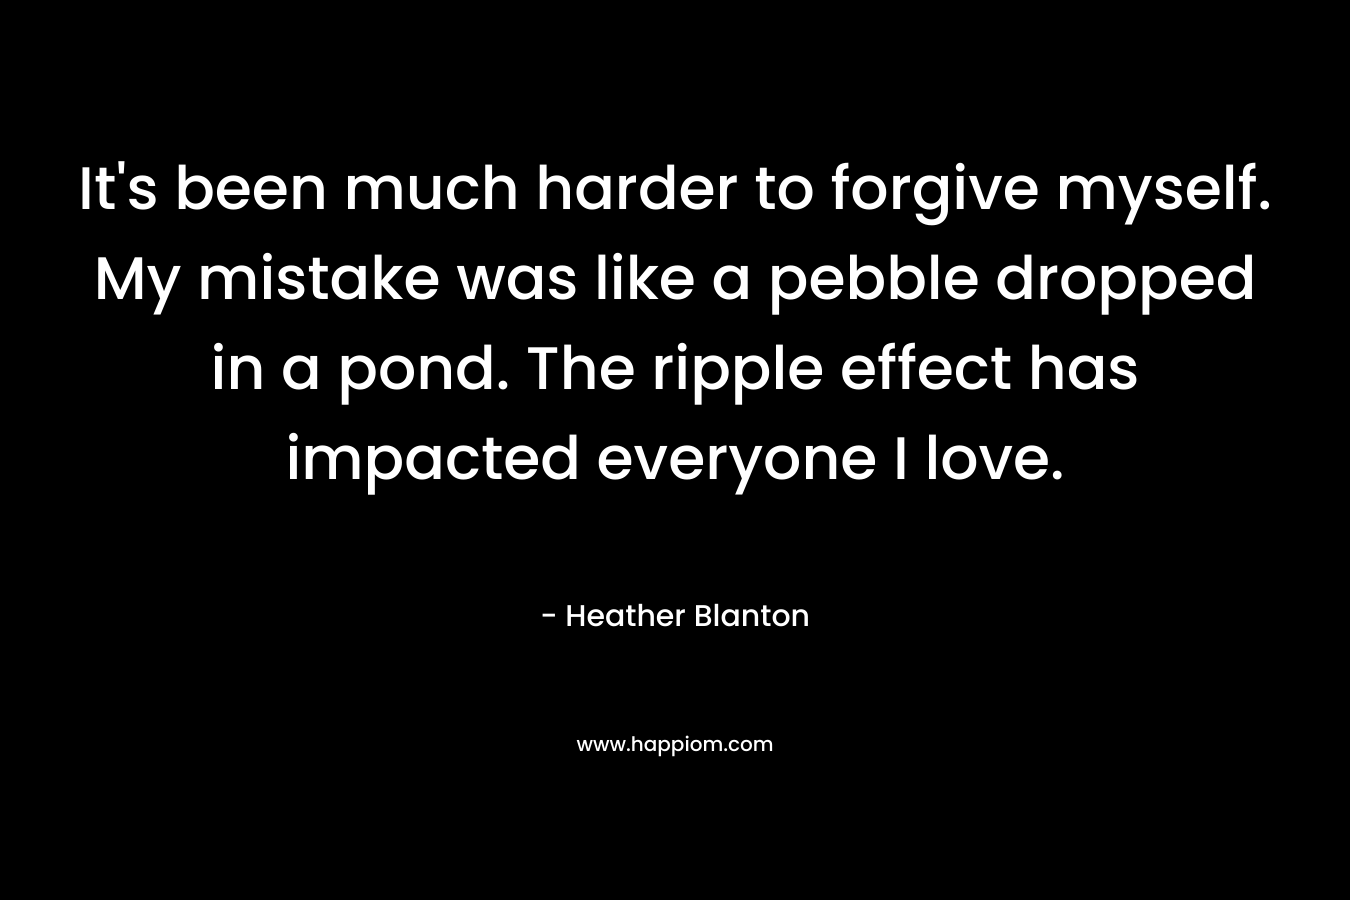 It's been much harder to forgive myself. My mistake was like a pebble dropped in a pond. The ripple effect has impacted everyone I love.